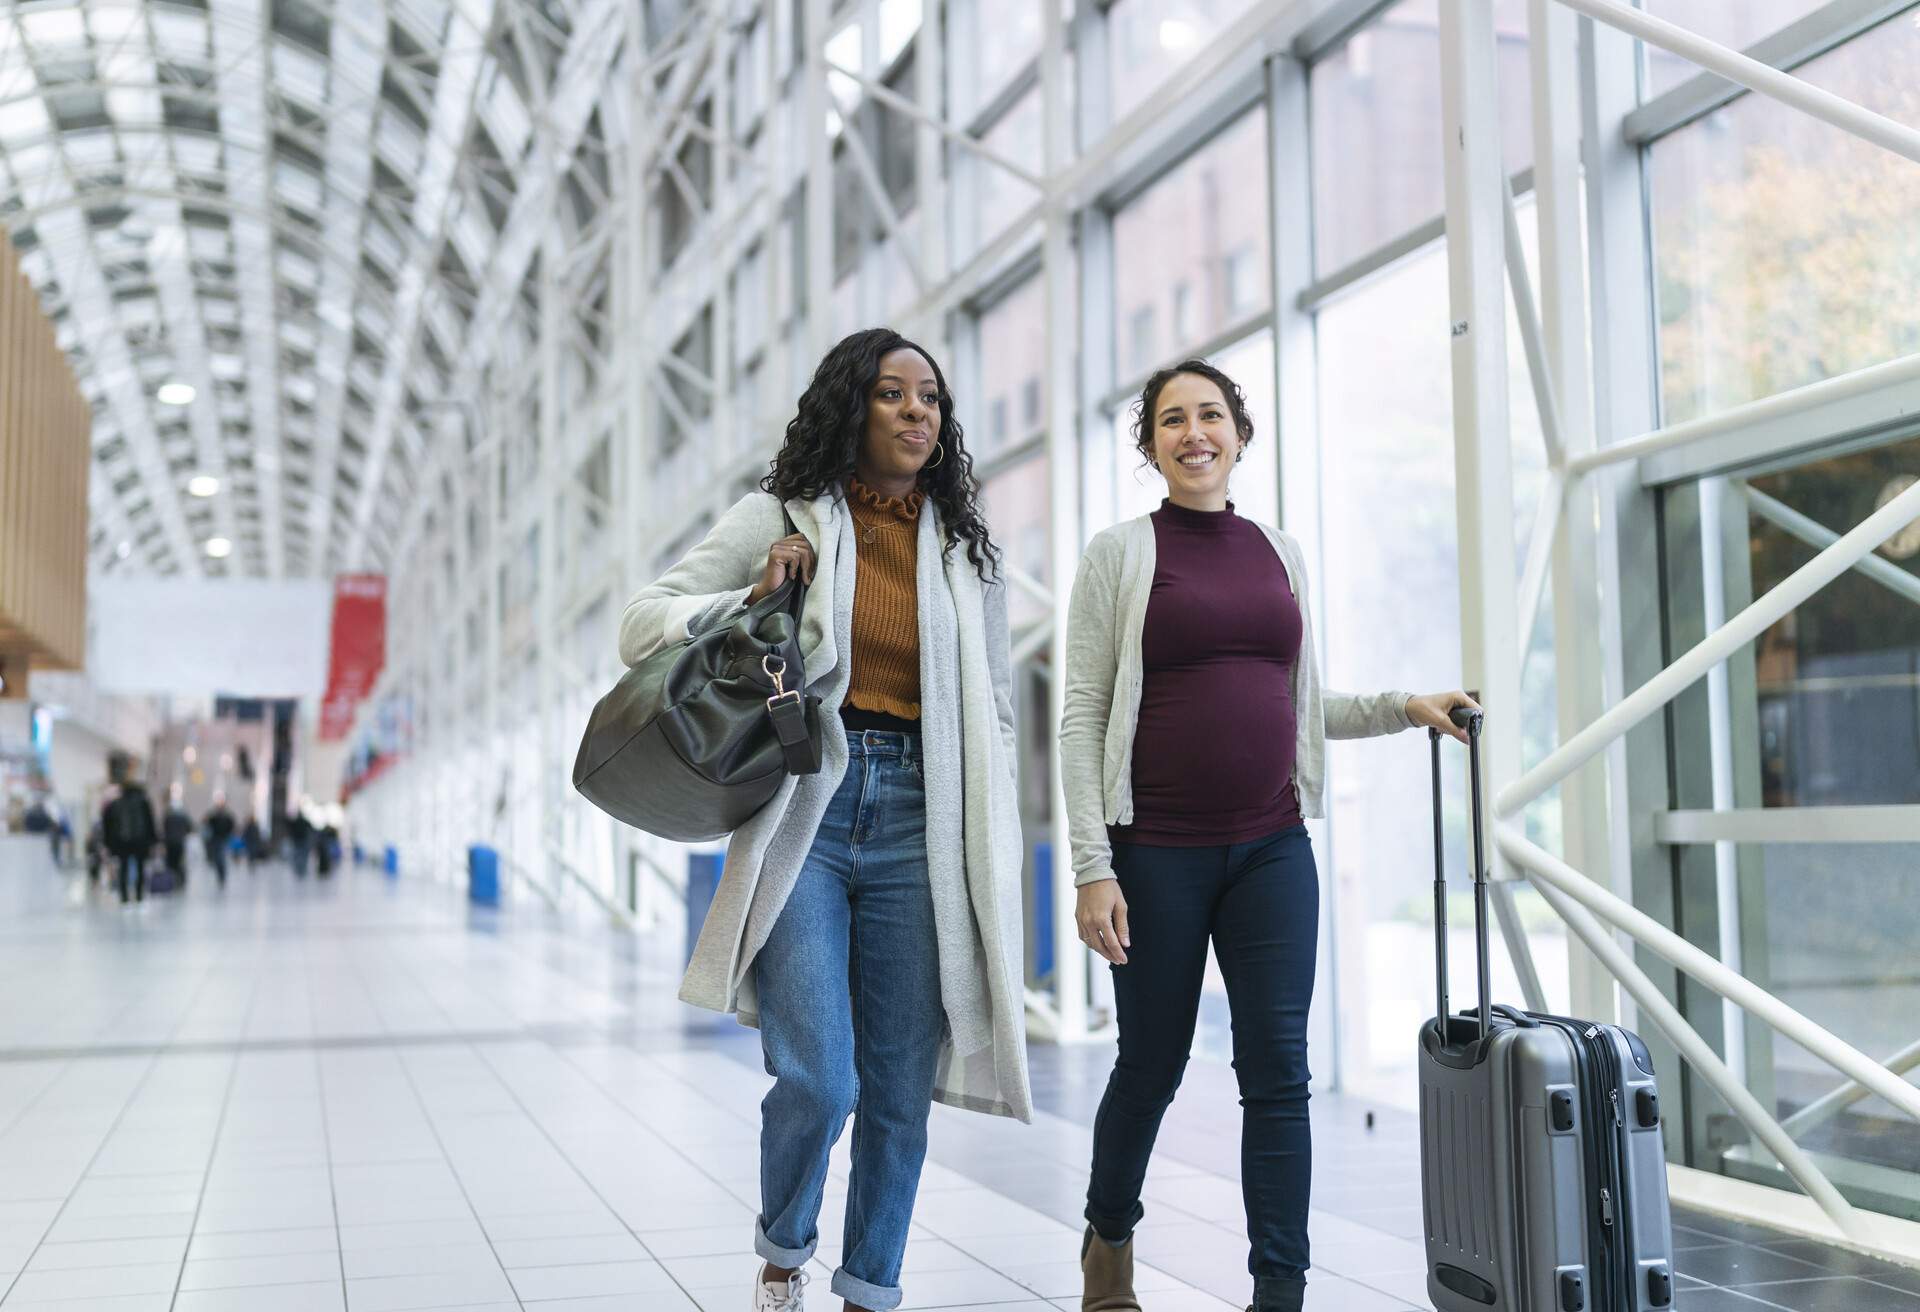 Women at an airport walking with their luggage